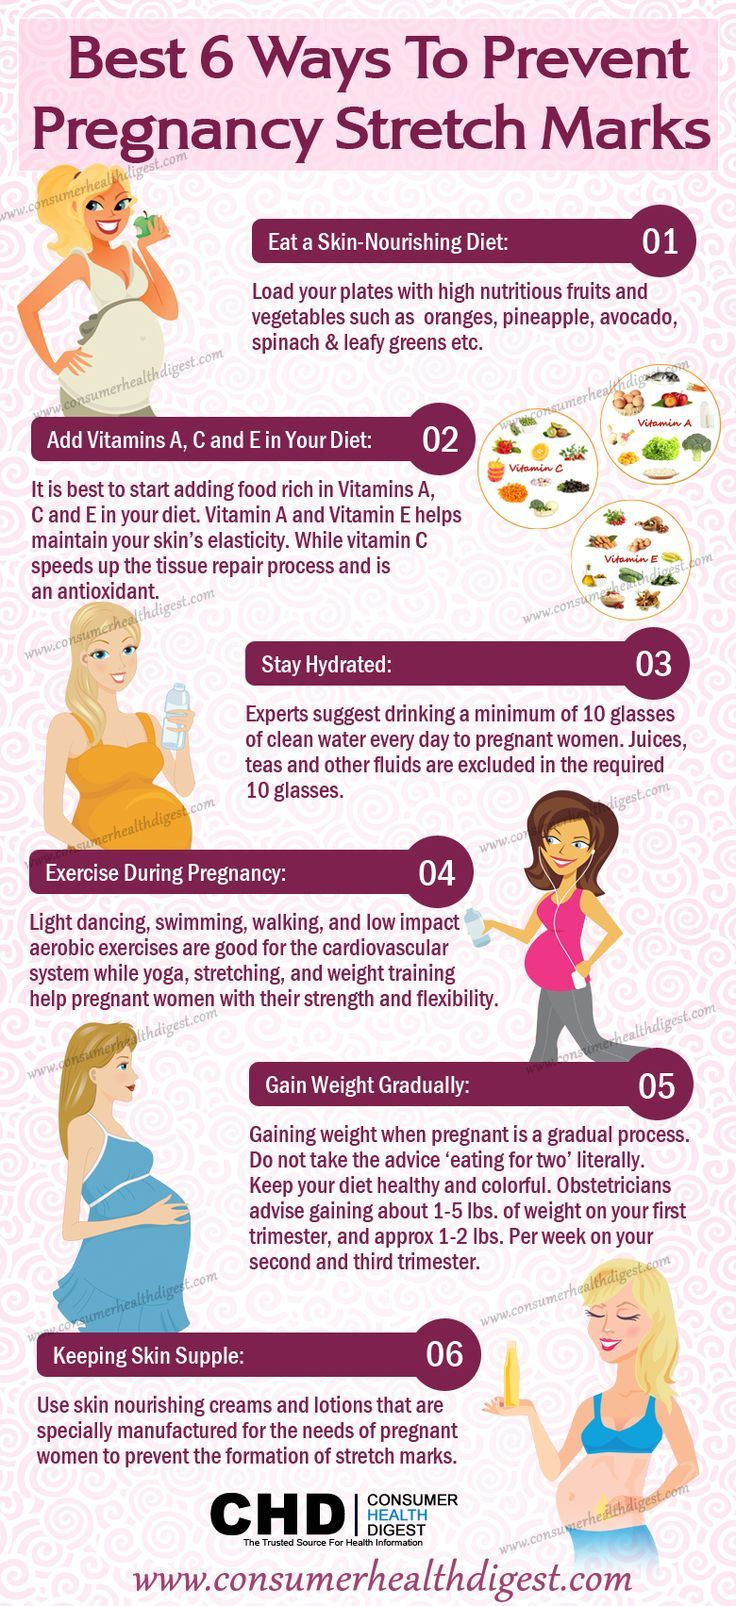 Clean Eating Pregnancy
 24 Ideas for Clean Eating Pregnancy Best Round Up Recipe